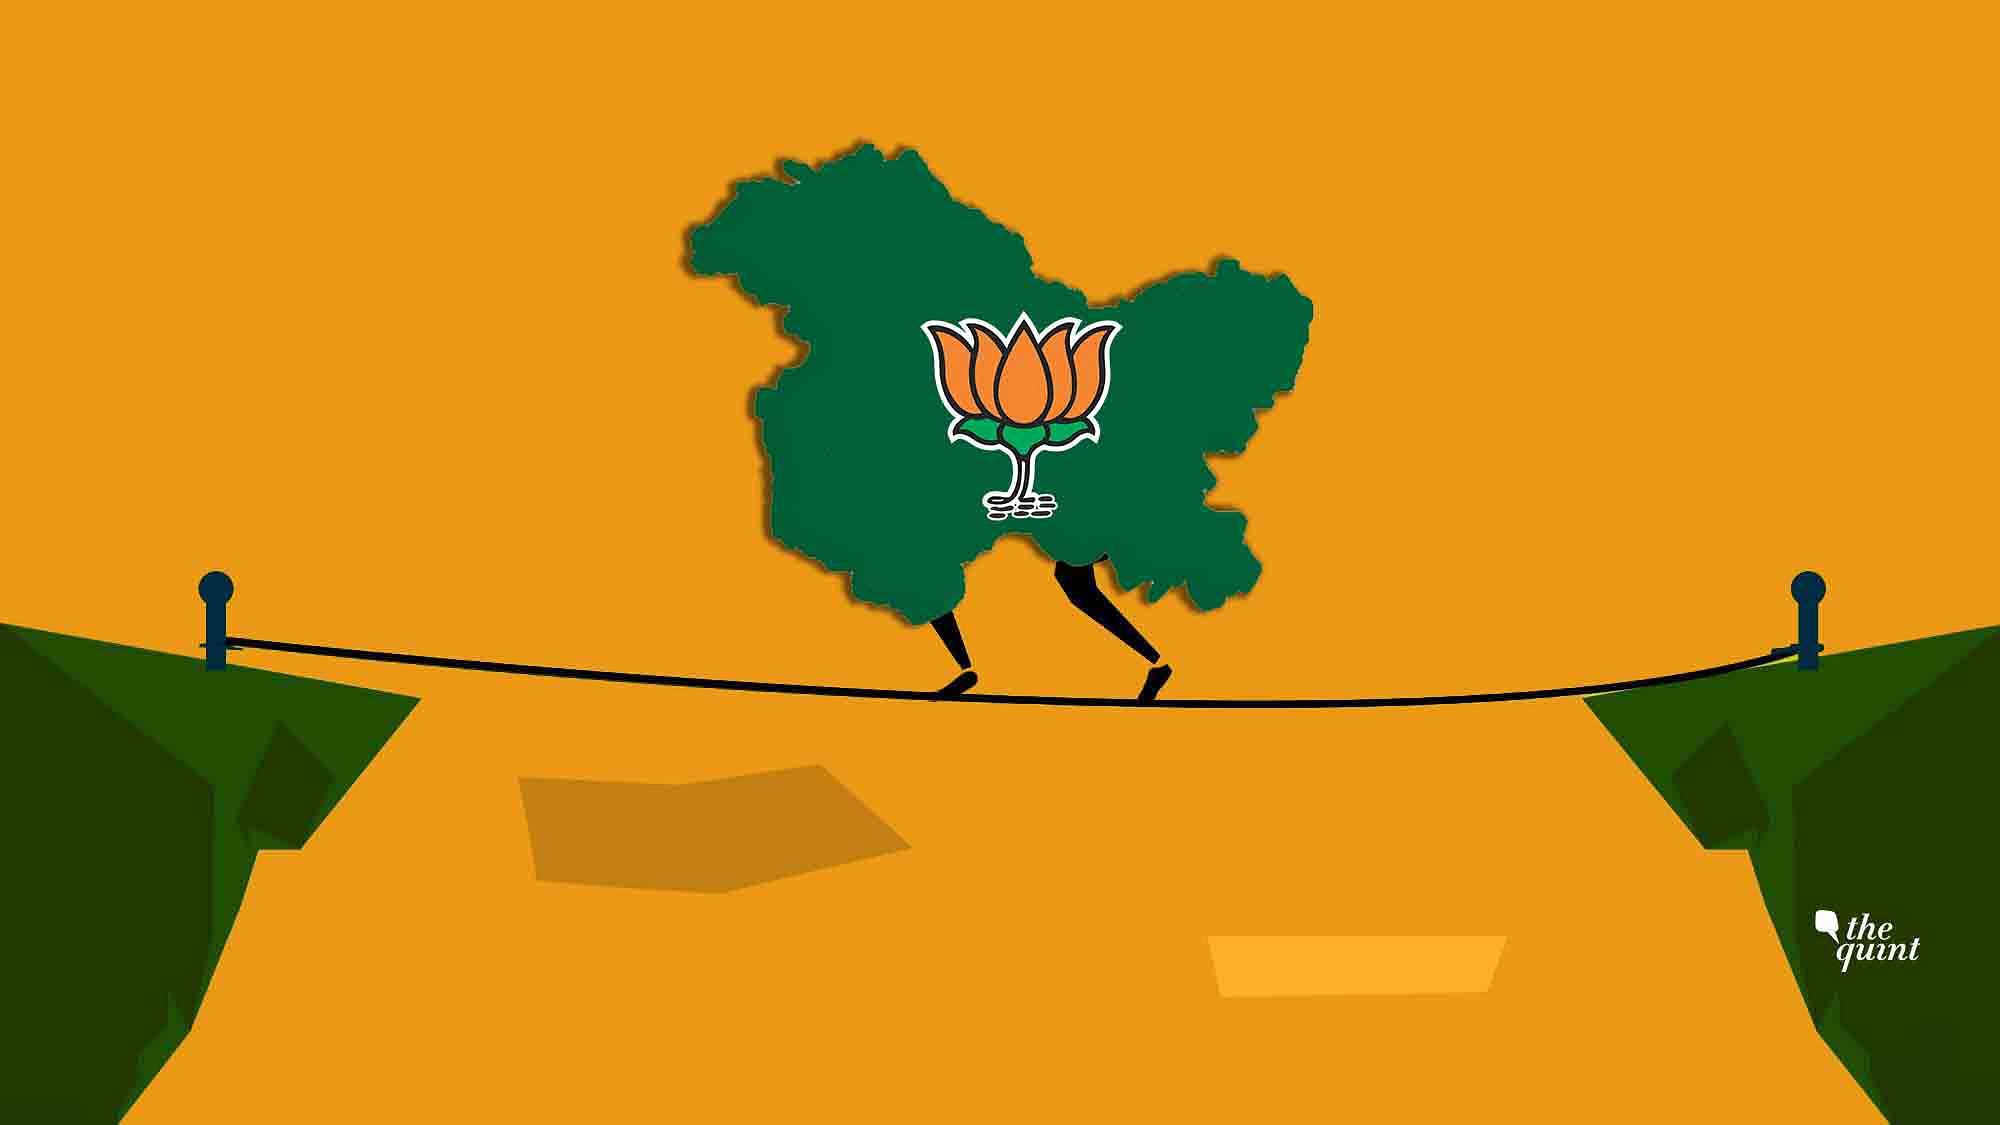 BJP is doing a tightrope walk in J&amp;K. Image of J&amp;K map and BJP party symbol used for representational purposes.